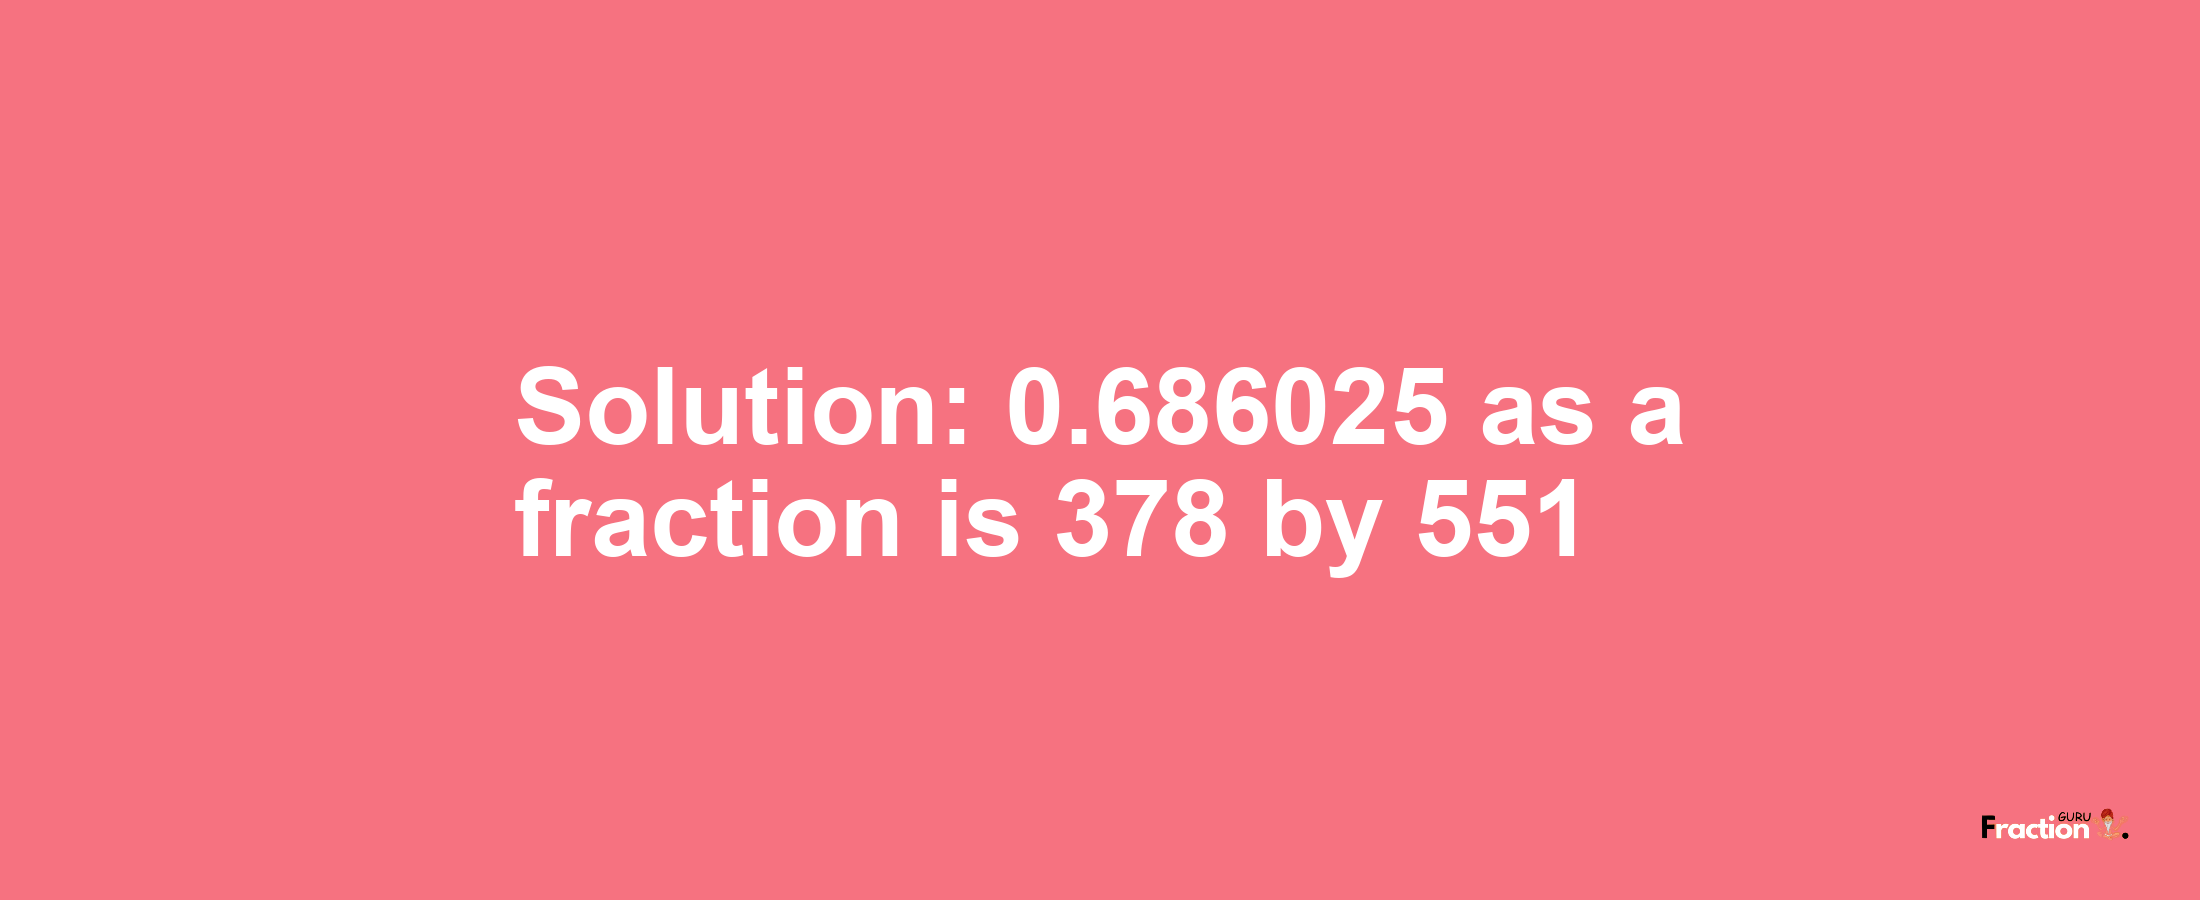 Solution:0.686025 as a fraction is 378/551